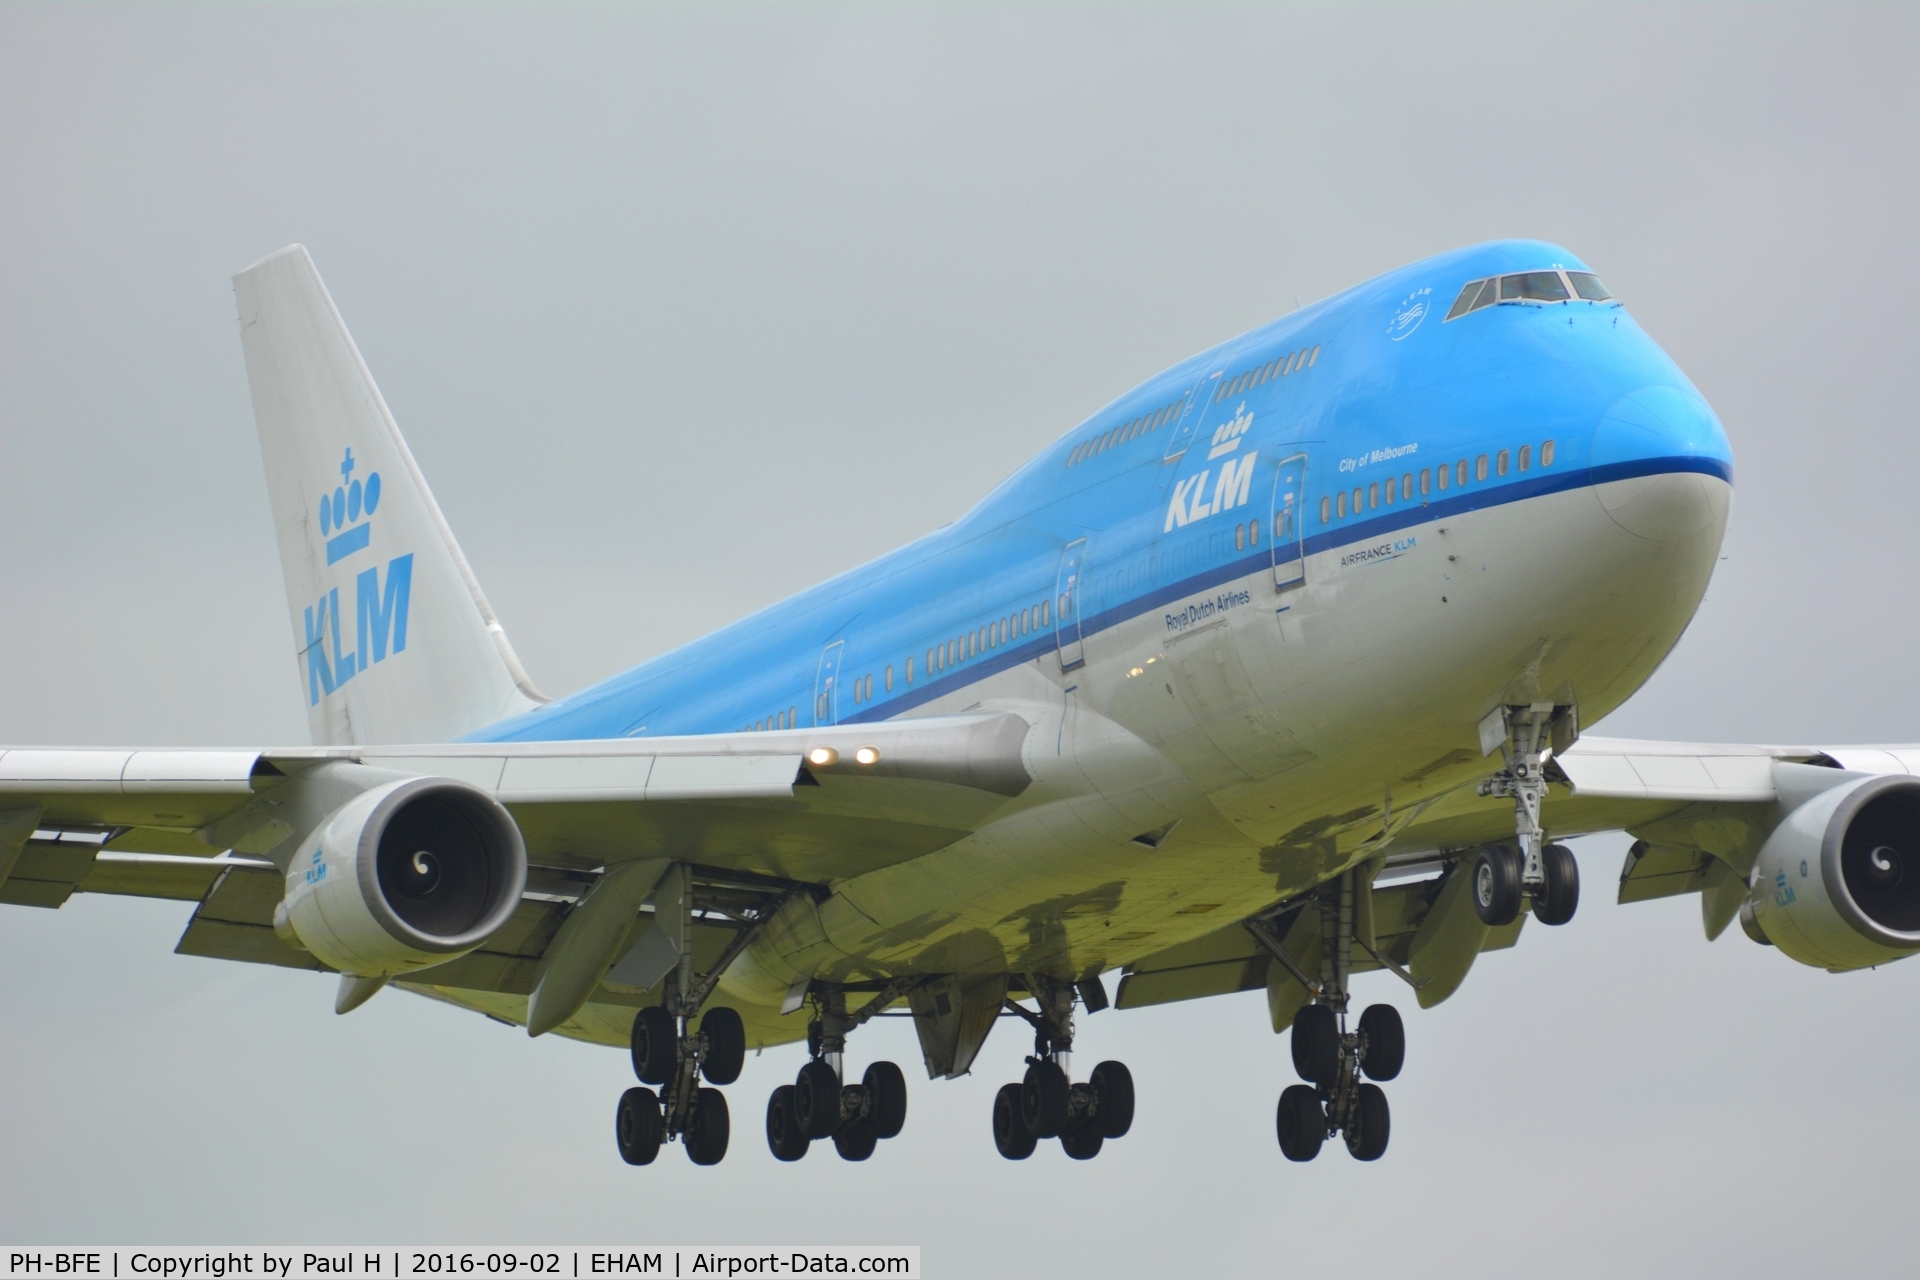 PH-BFE, 1990 Boeing 747-406BC C/N 24201, B-747 on final approach at the Polderbaan